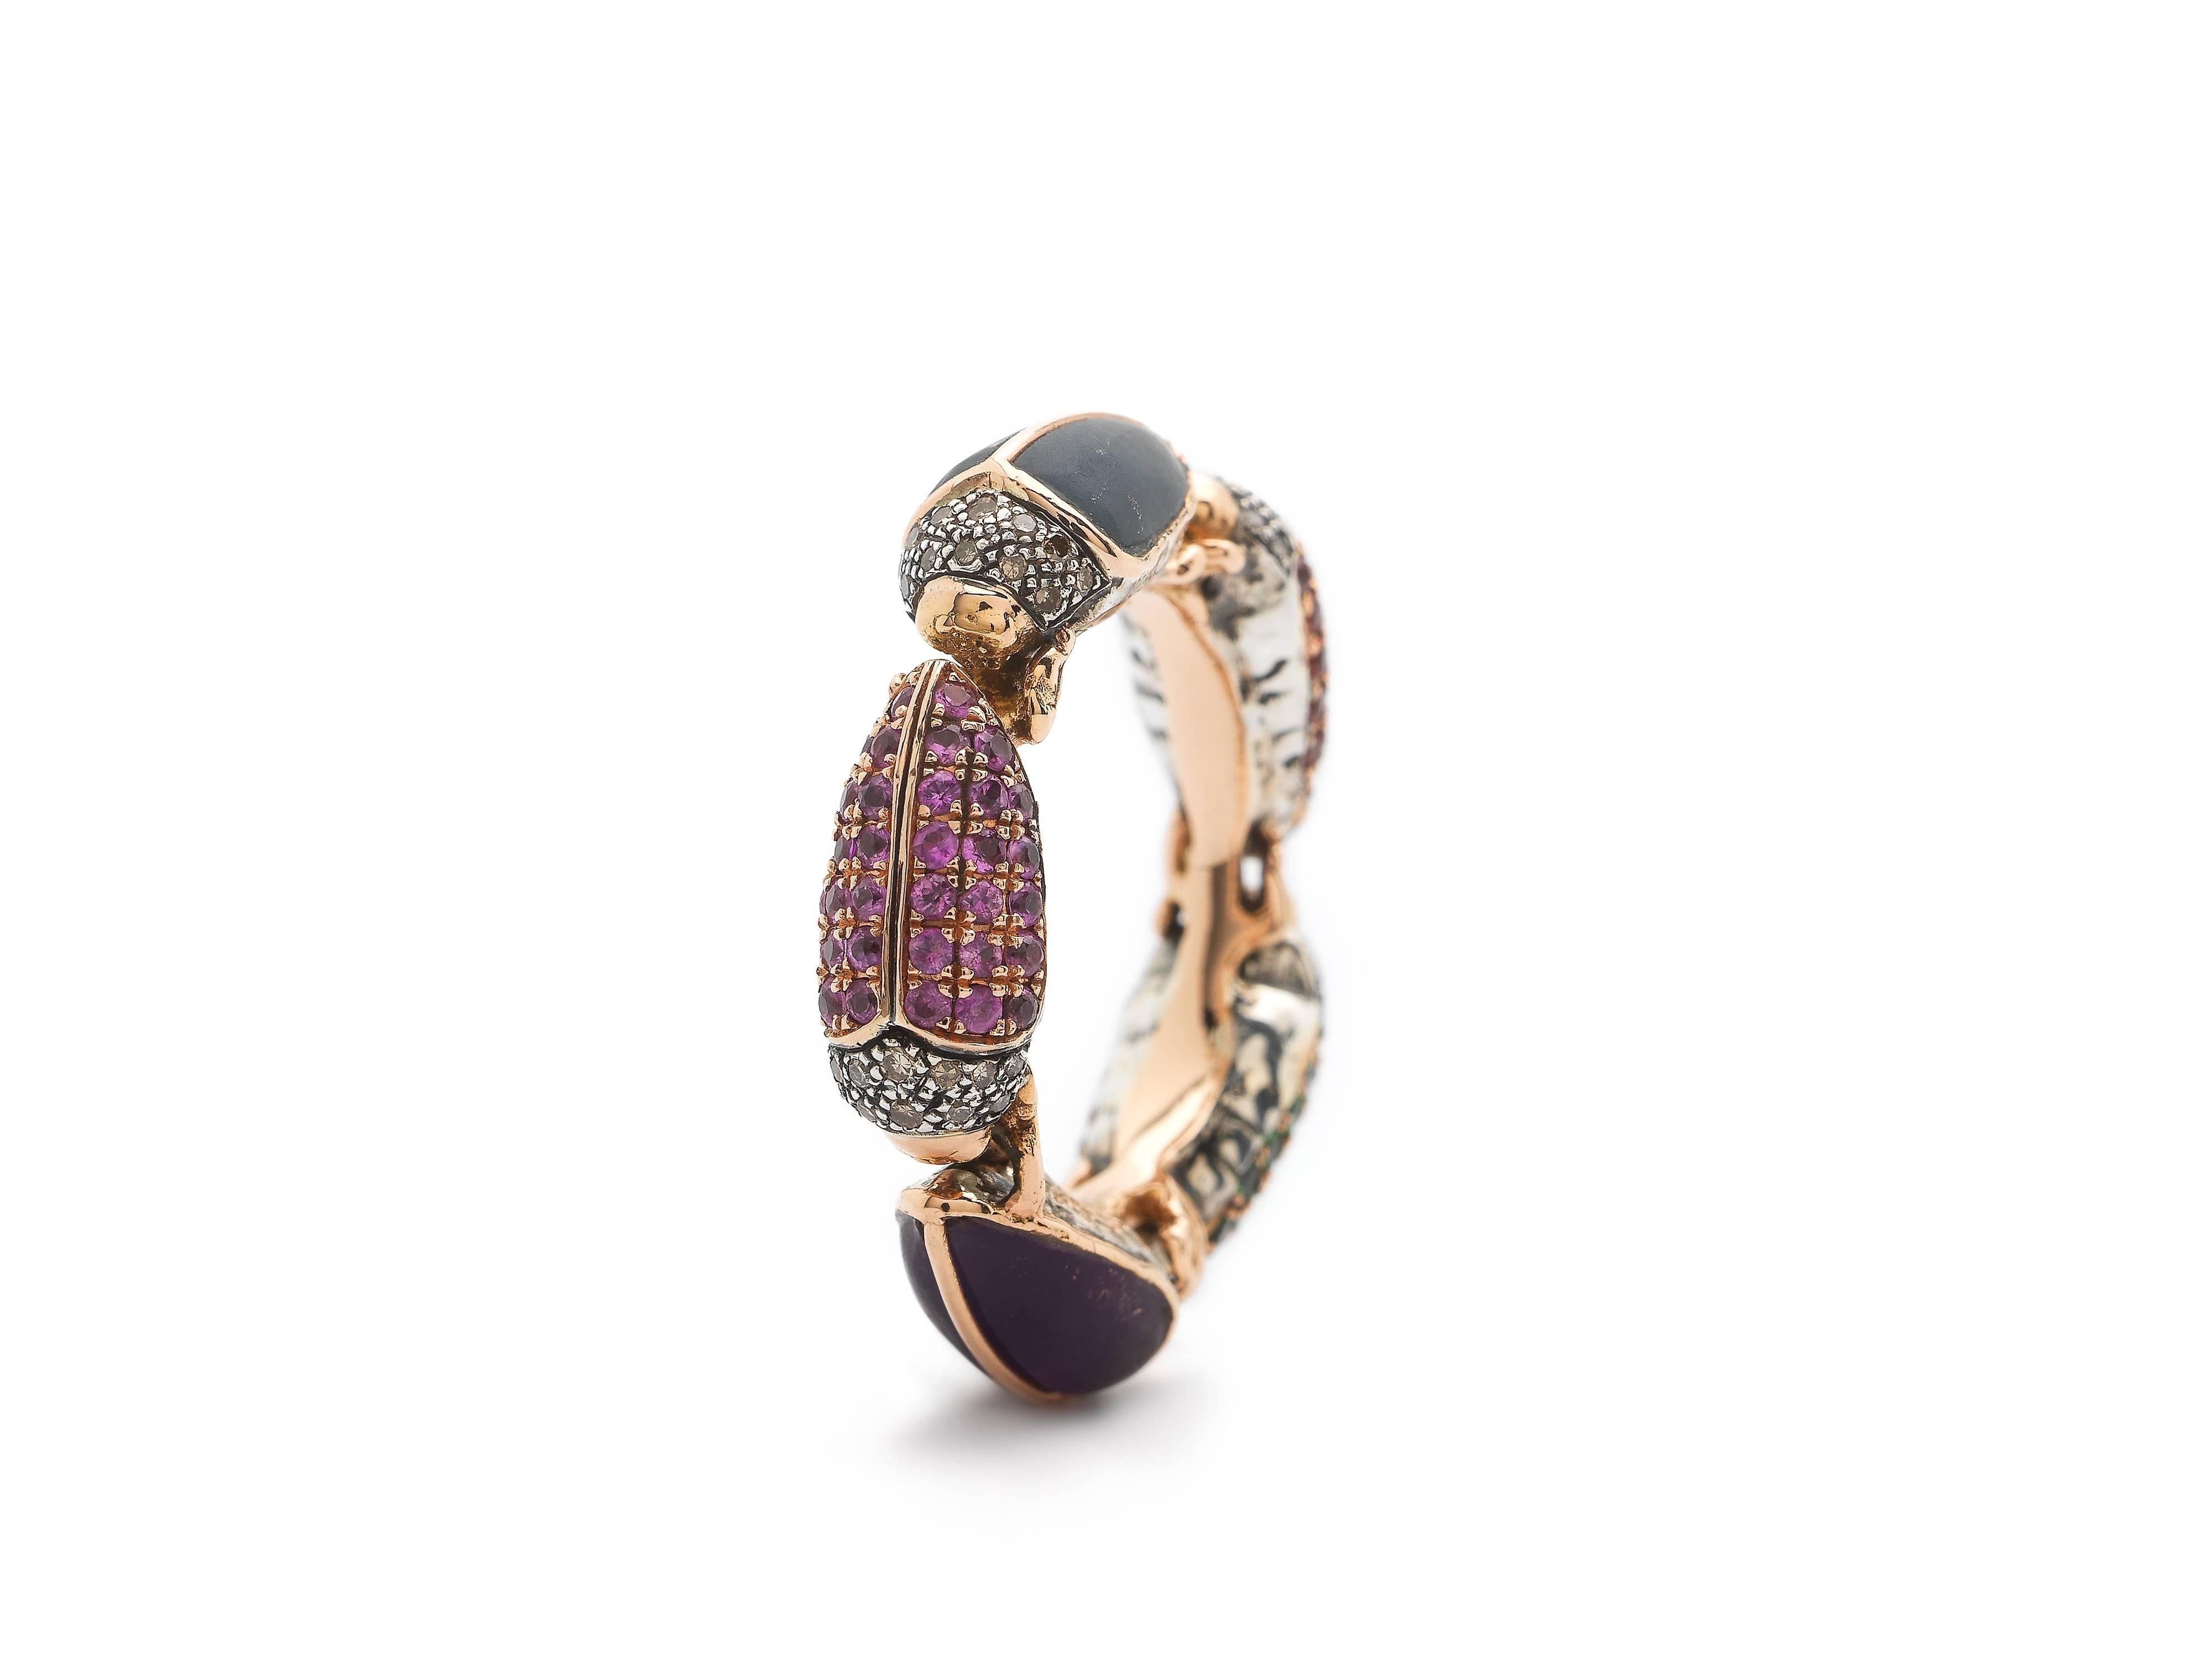 The Scarab Eternity Ring from Bibi van der Velden features a row of small scarabs lined up head-to-tail, in various gemstone tones and materials. The ring is composed of 18k Rose Gold, with Sterling Silver scarabs, set with diamonds on their heads.